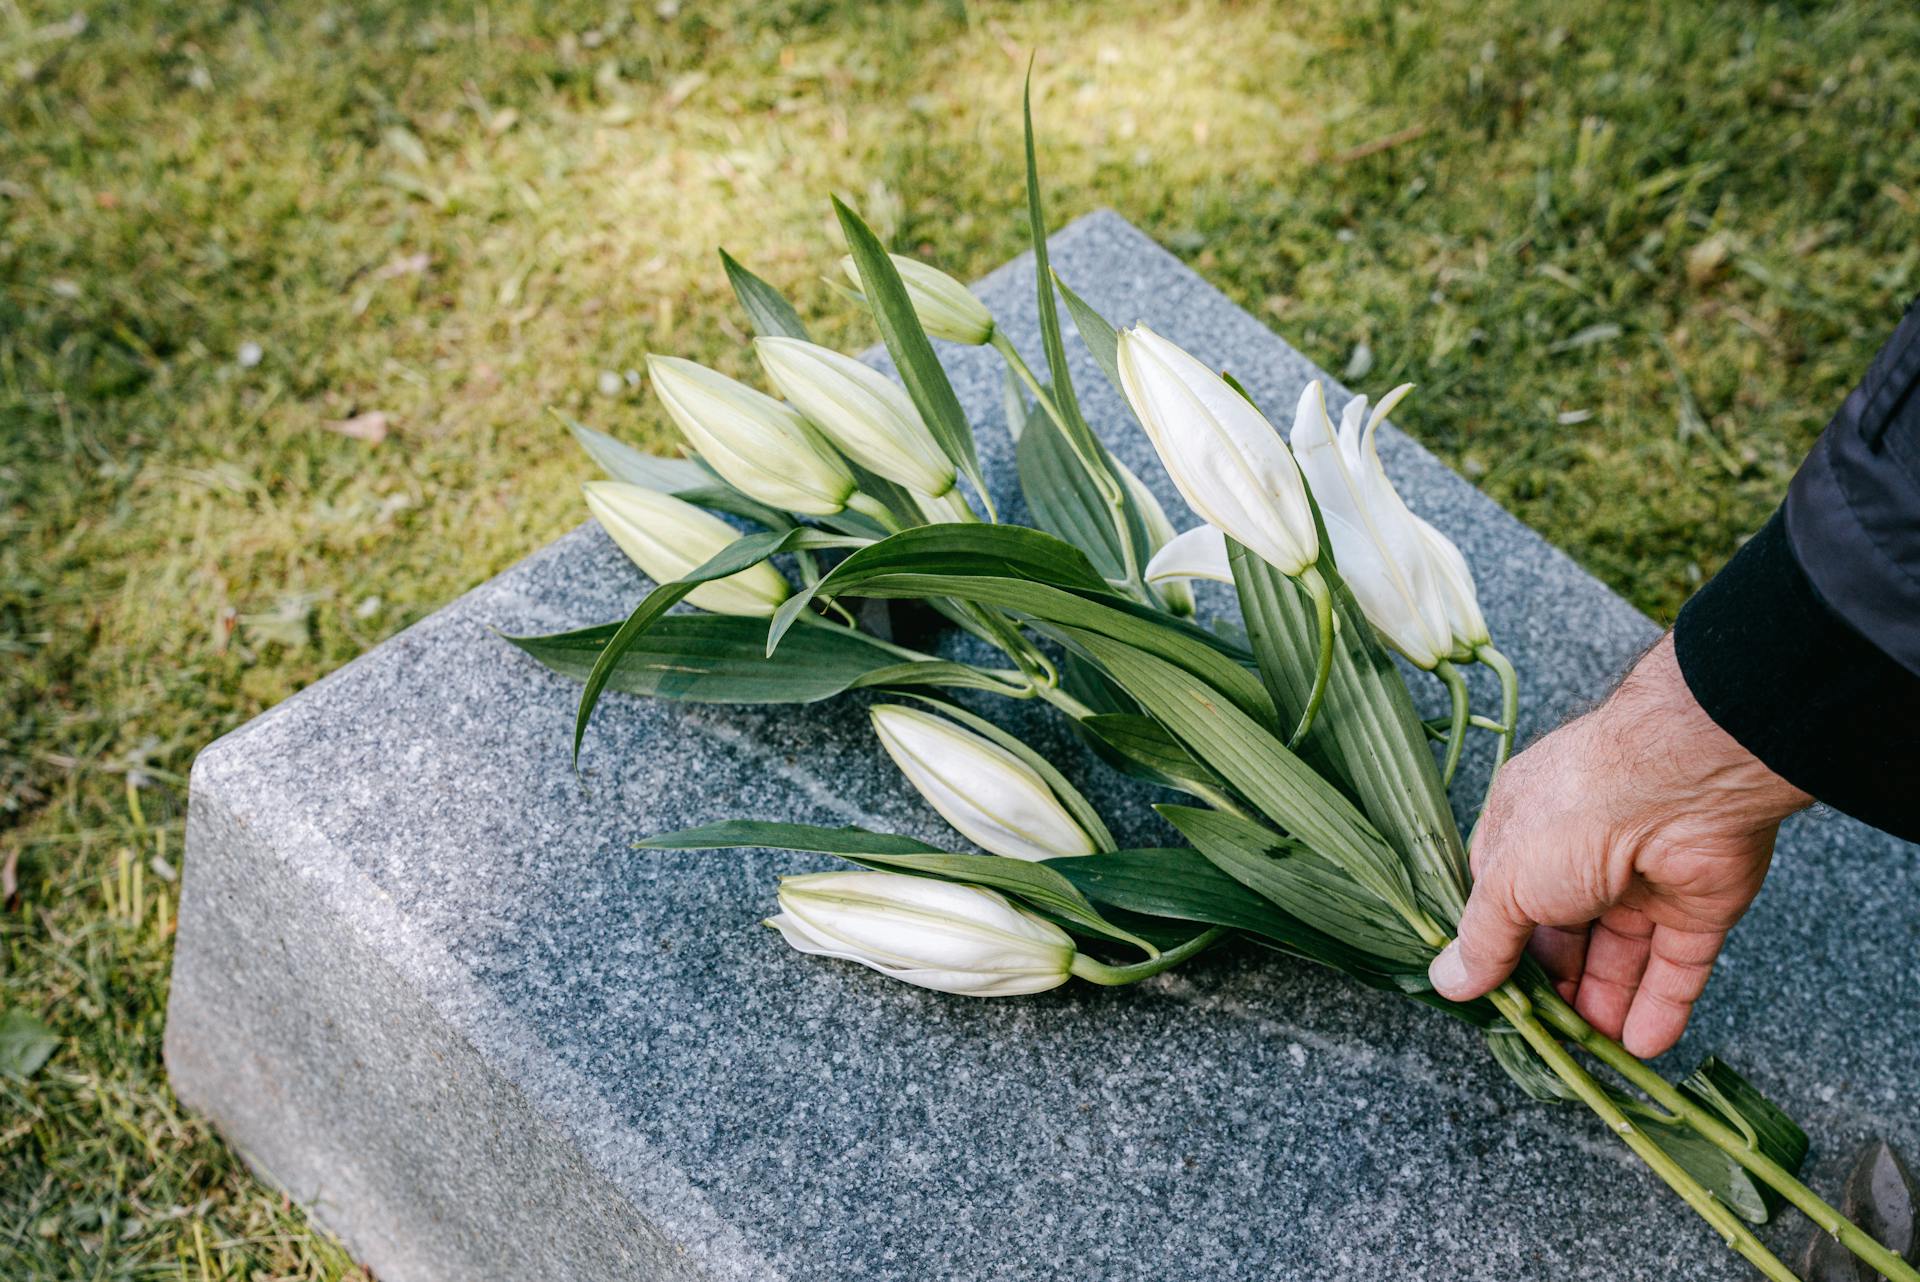 Flowers at a grave | Source: Pexels